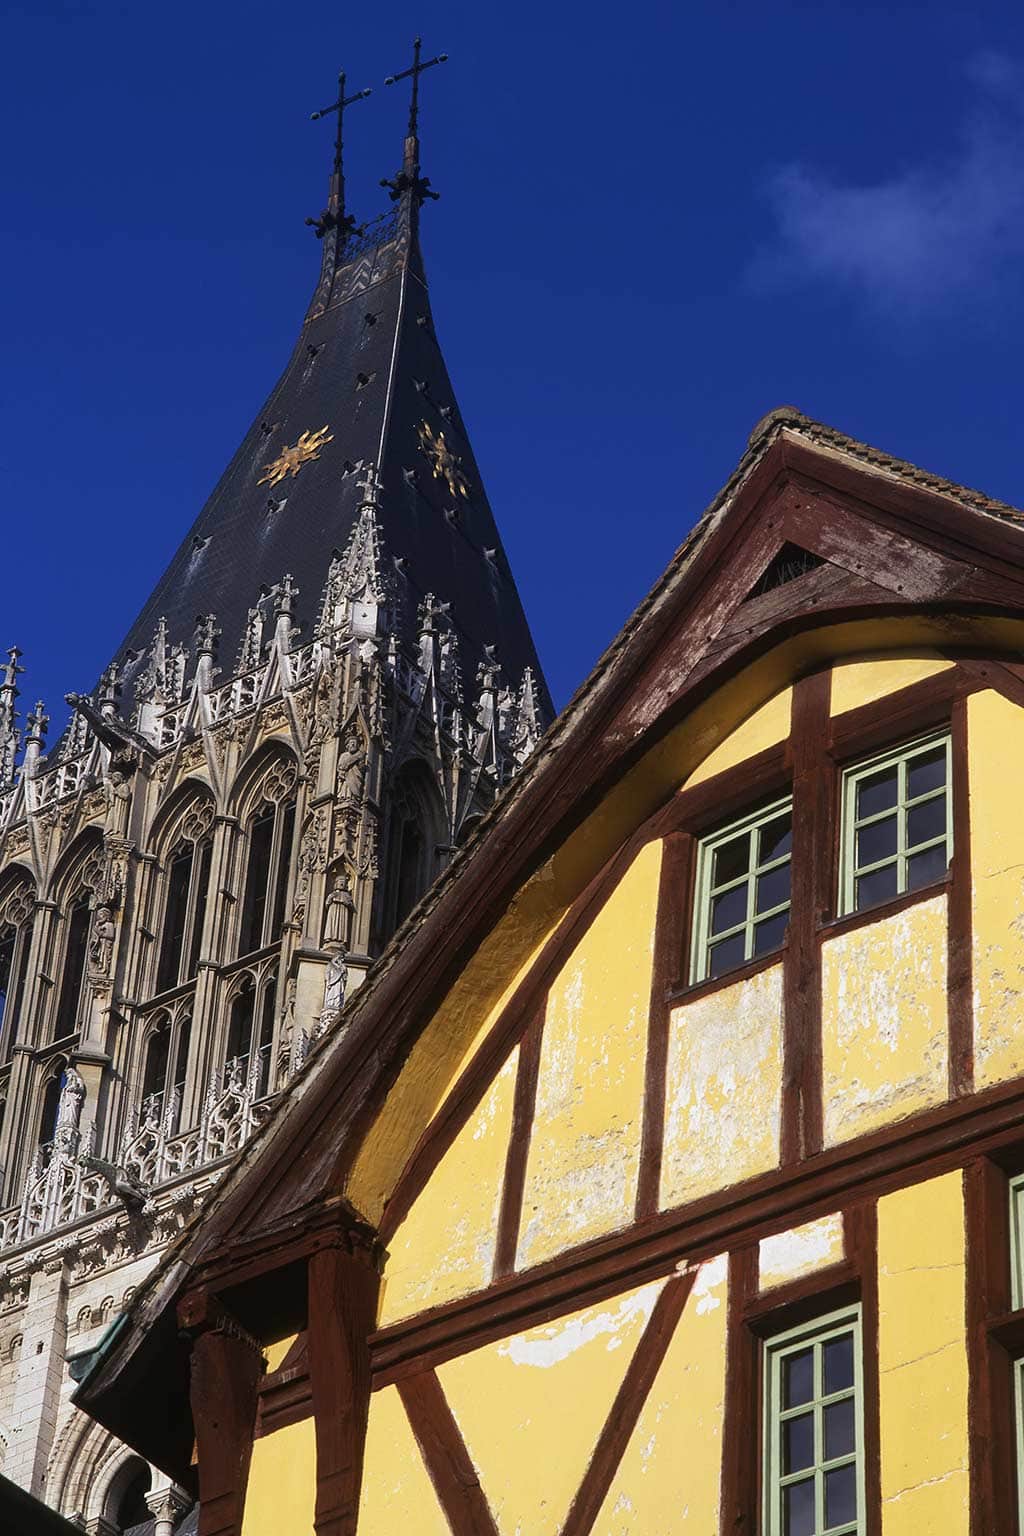 Image of a medieval house and one of the towers of Rouen Cathedral Normandy France